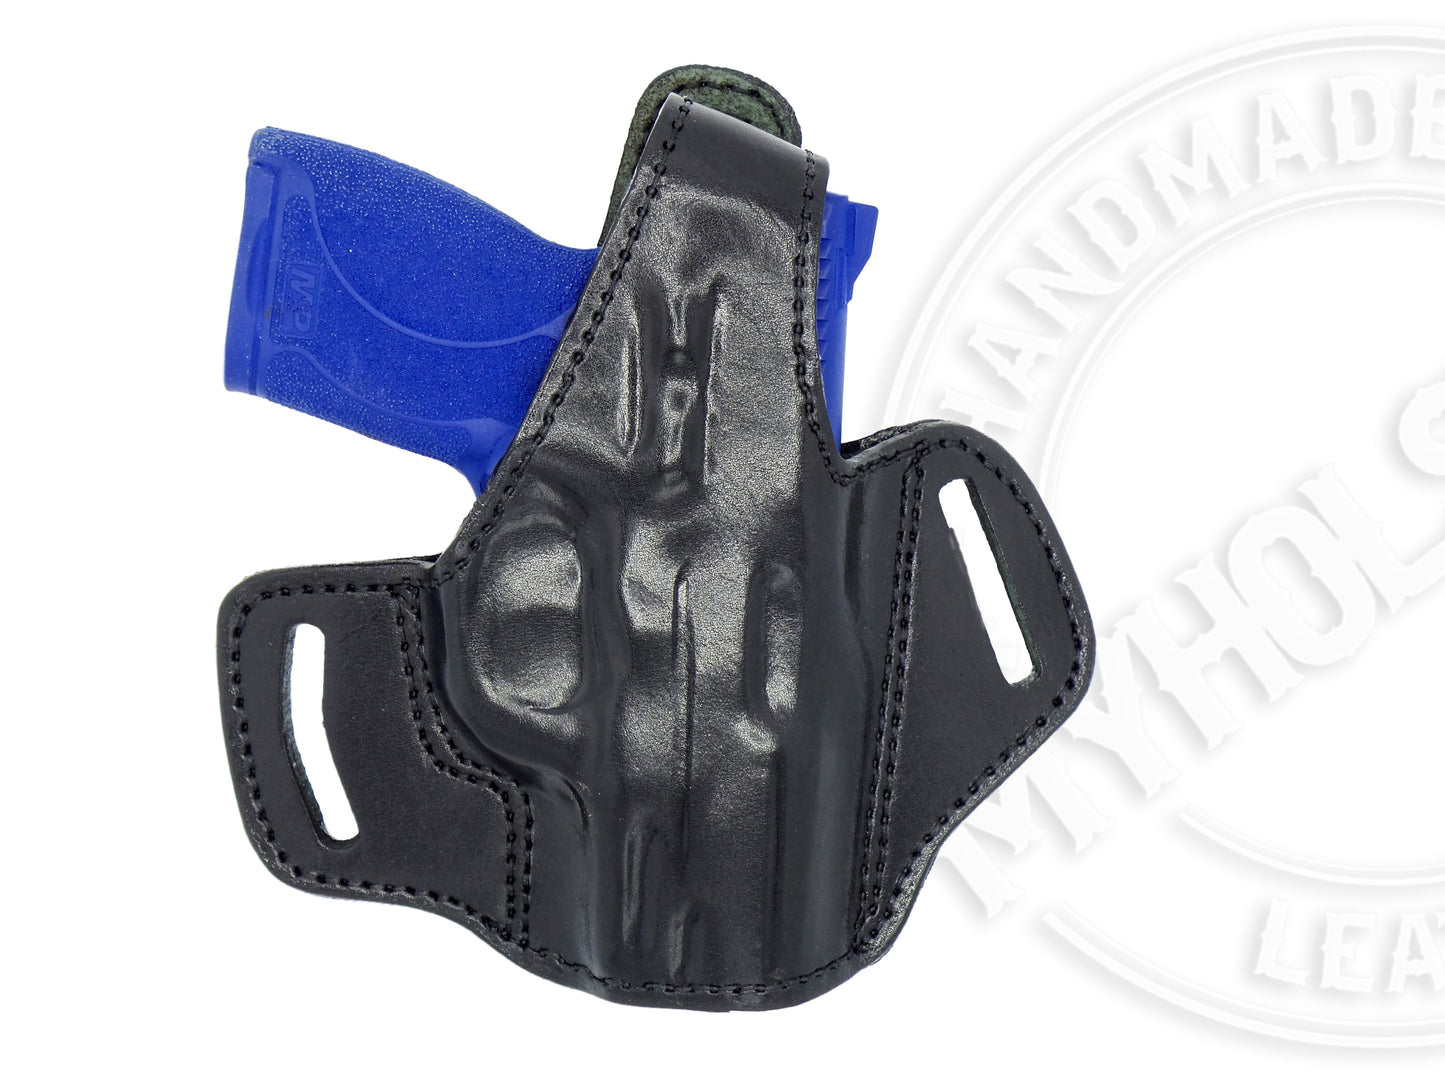 Astra A-75 45acp Compact OWB Thumb Break Leather Belt Holster